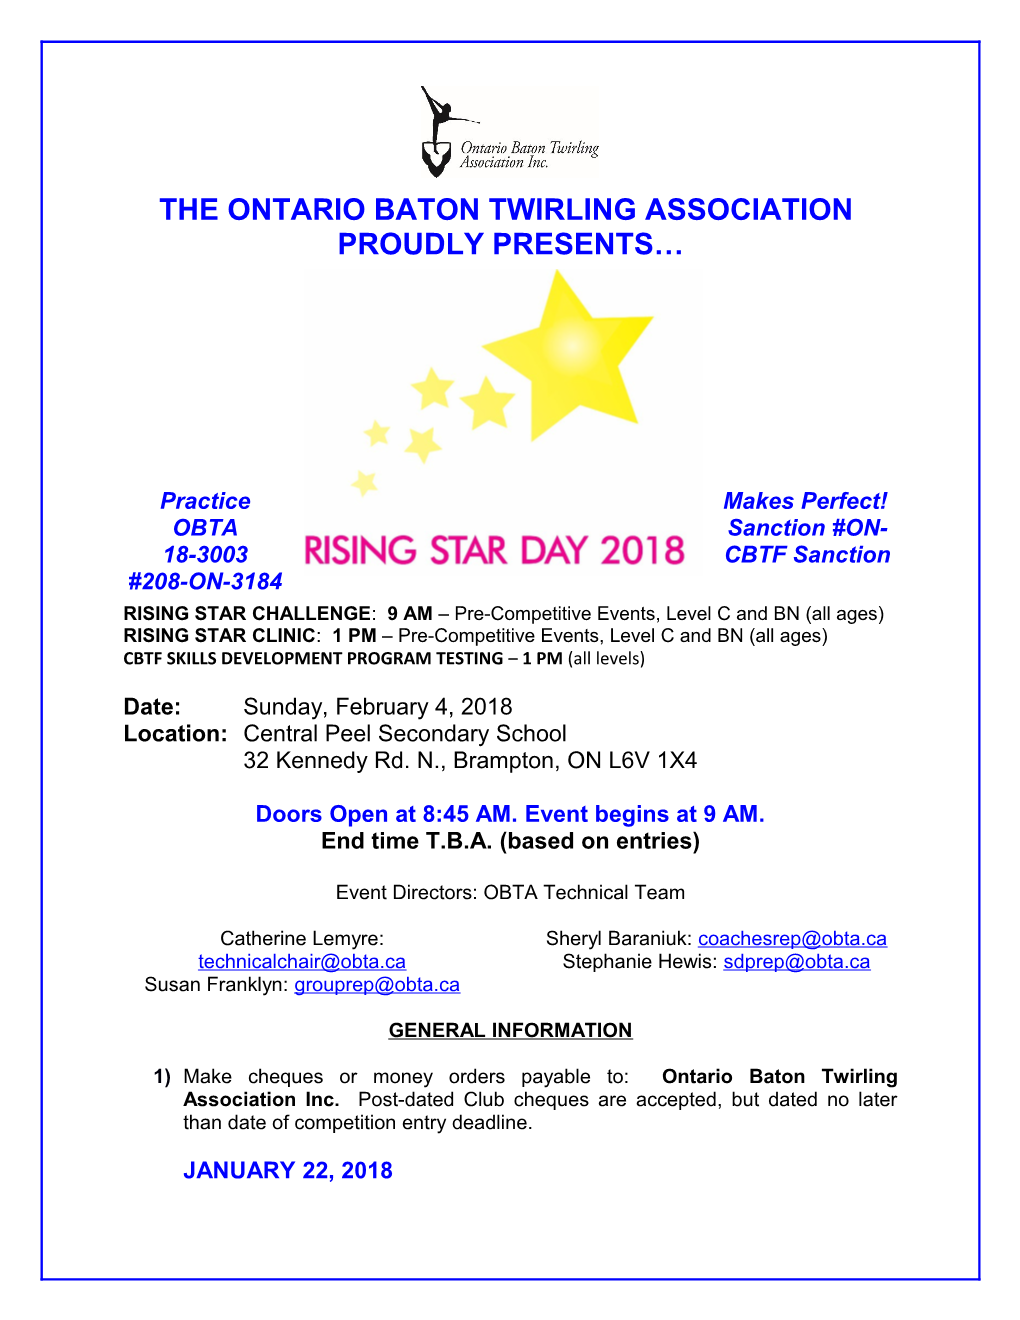 The Ontario Baton Twirling Association Proudly Presents